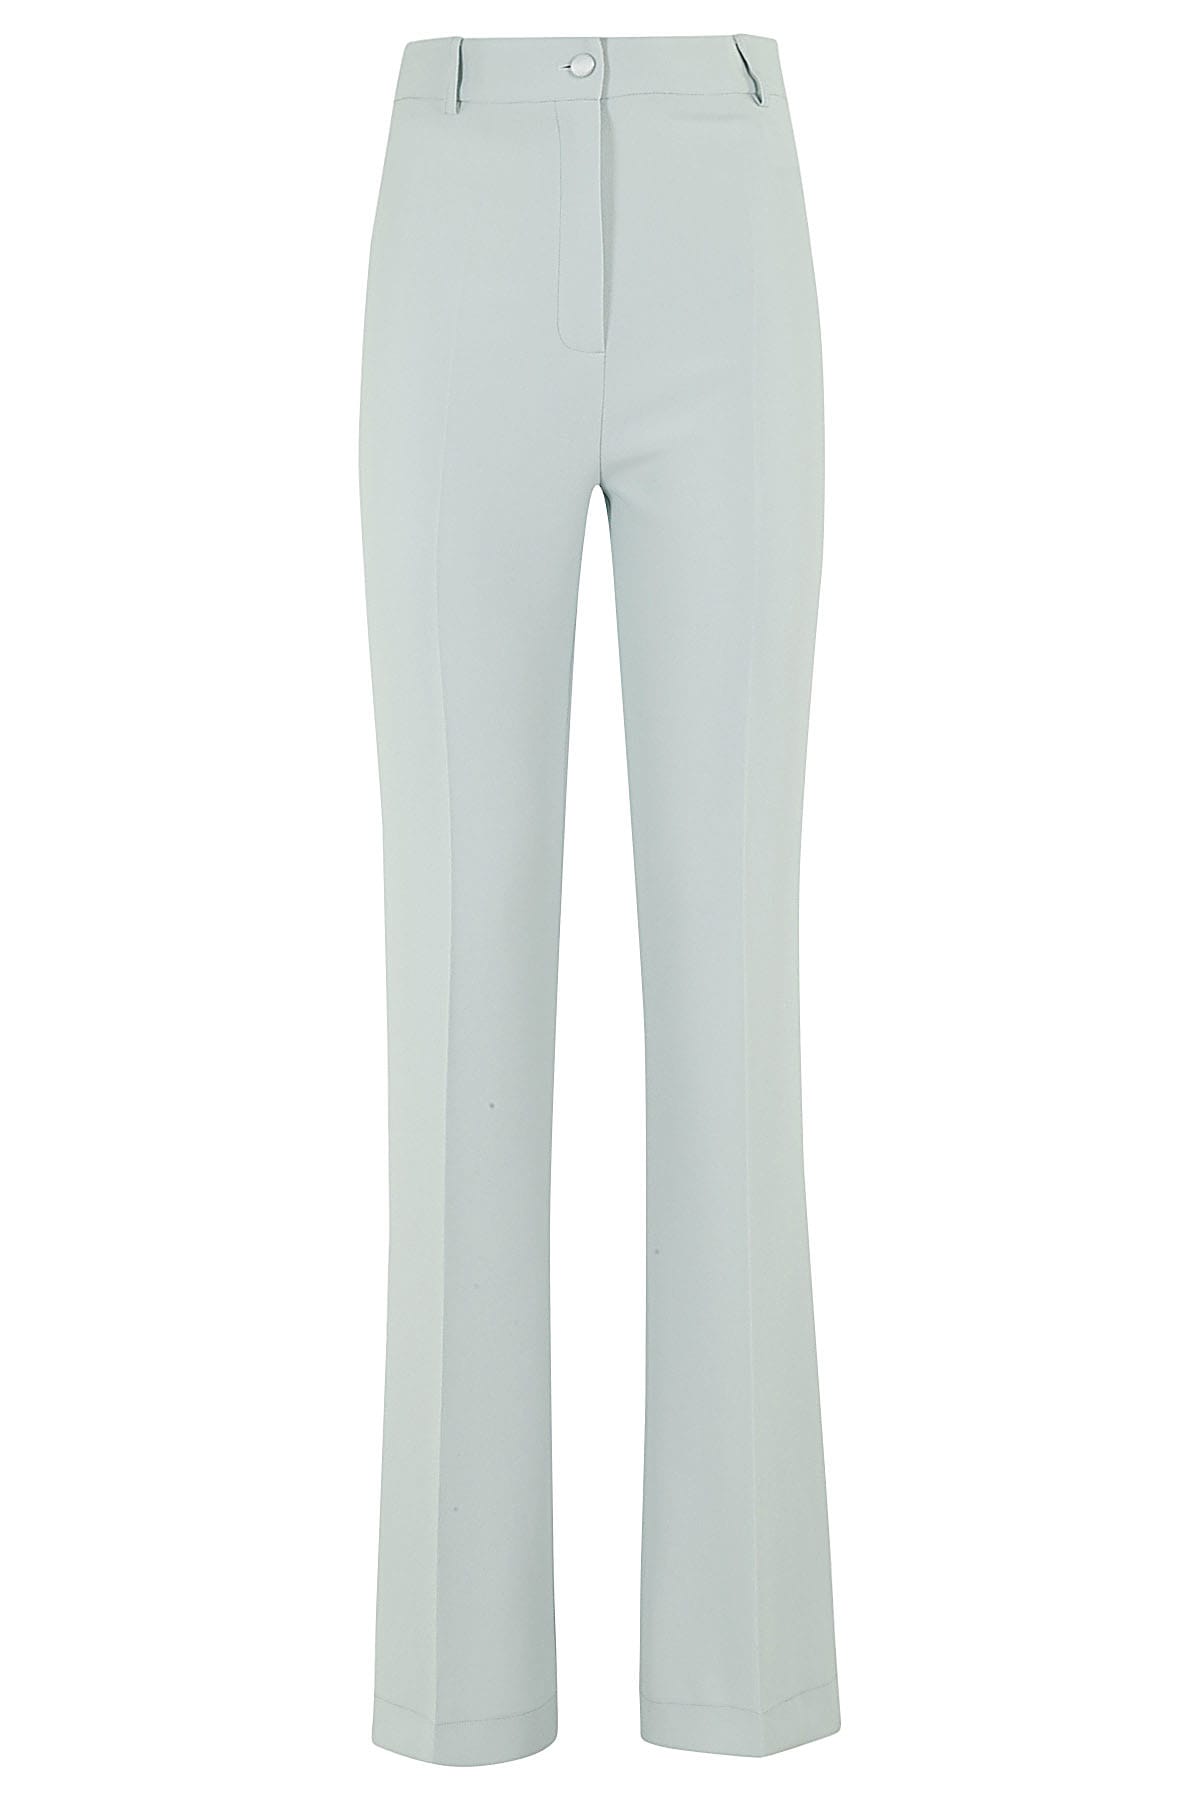 Shop Hebe Studio The Georgia Pant Cady In Teal